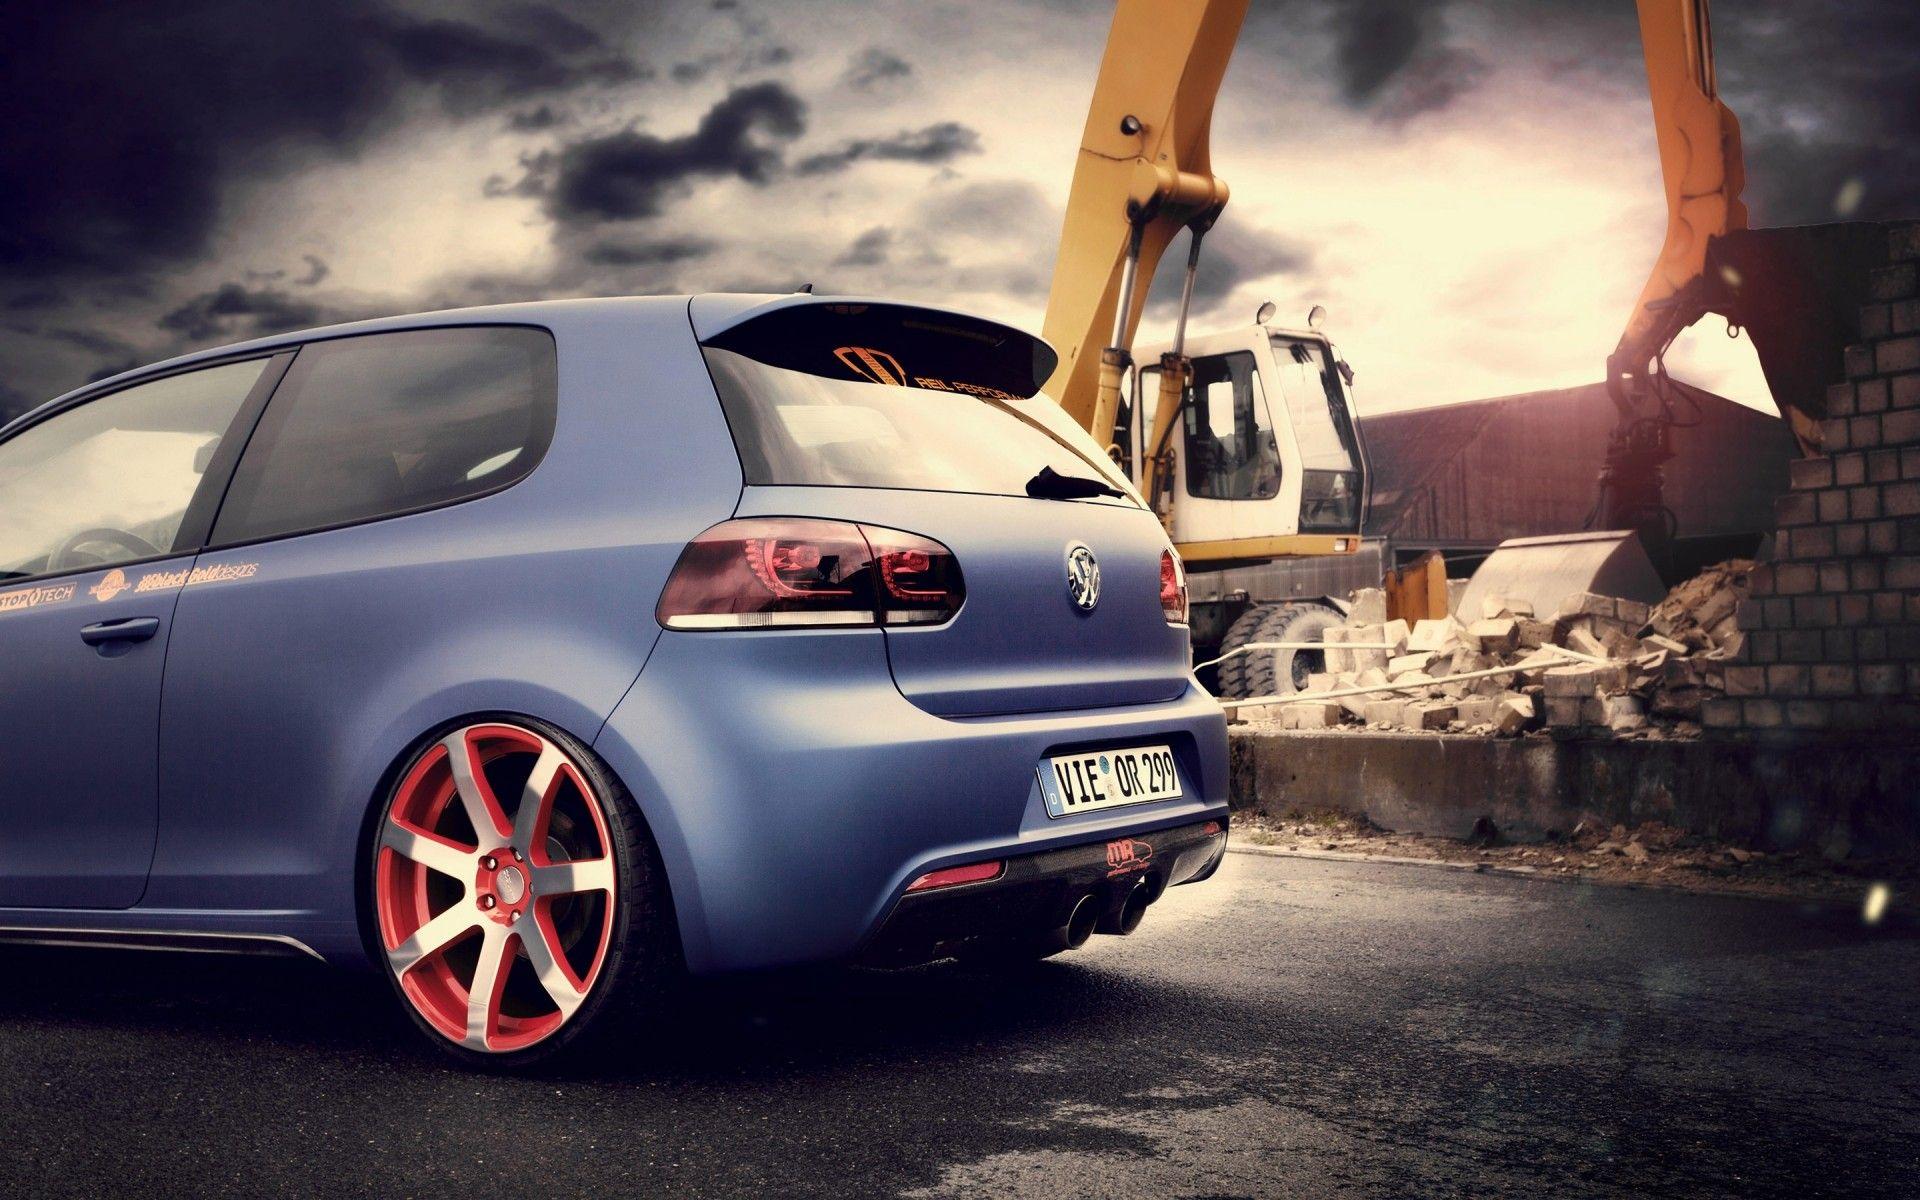 BBM VW Golf 6 Rear. Android wallpaper for free